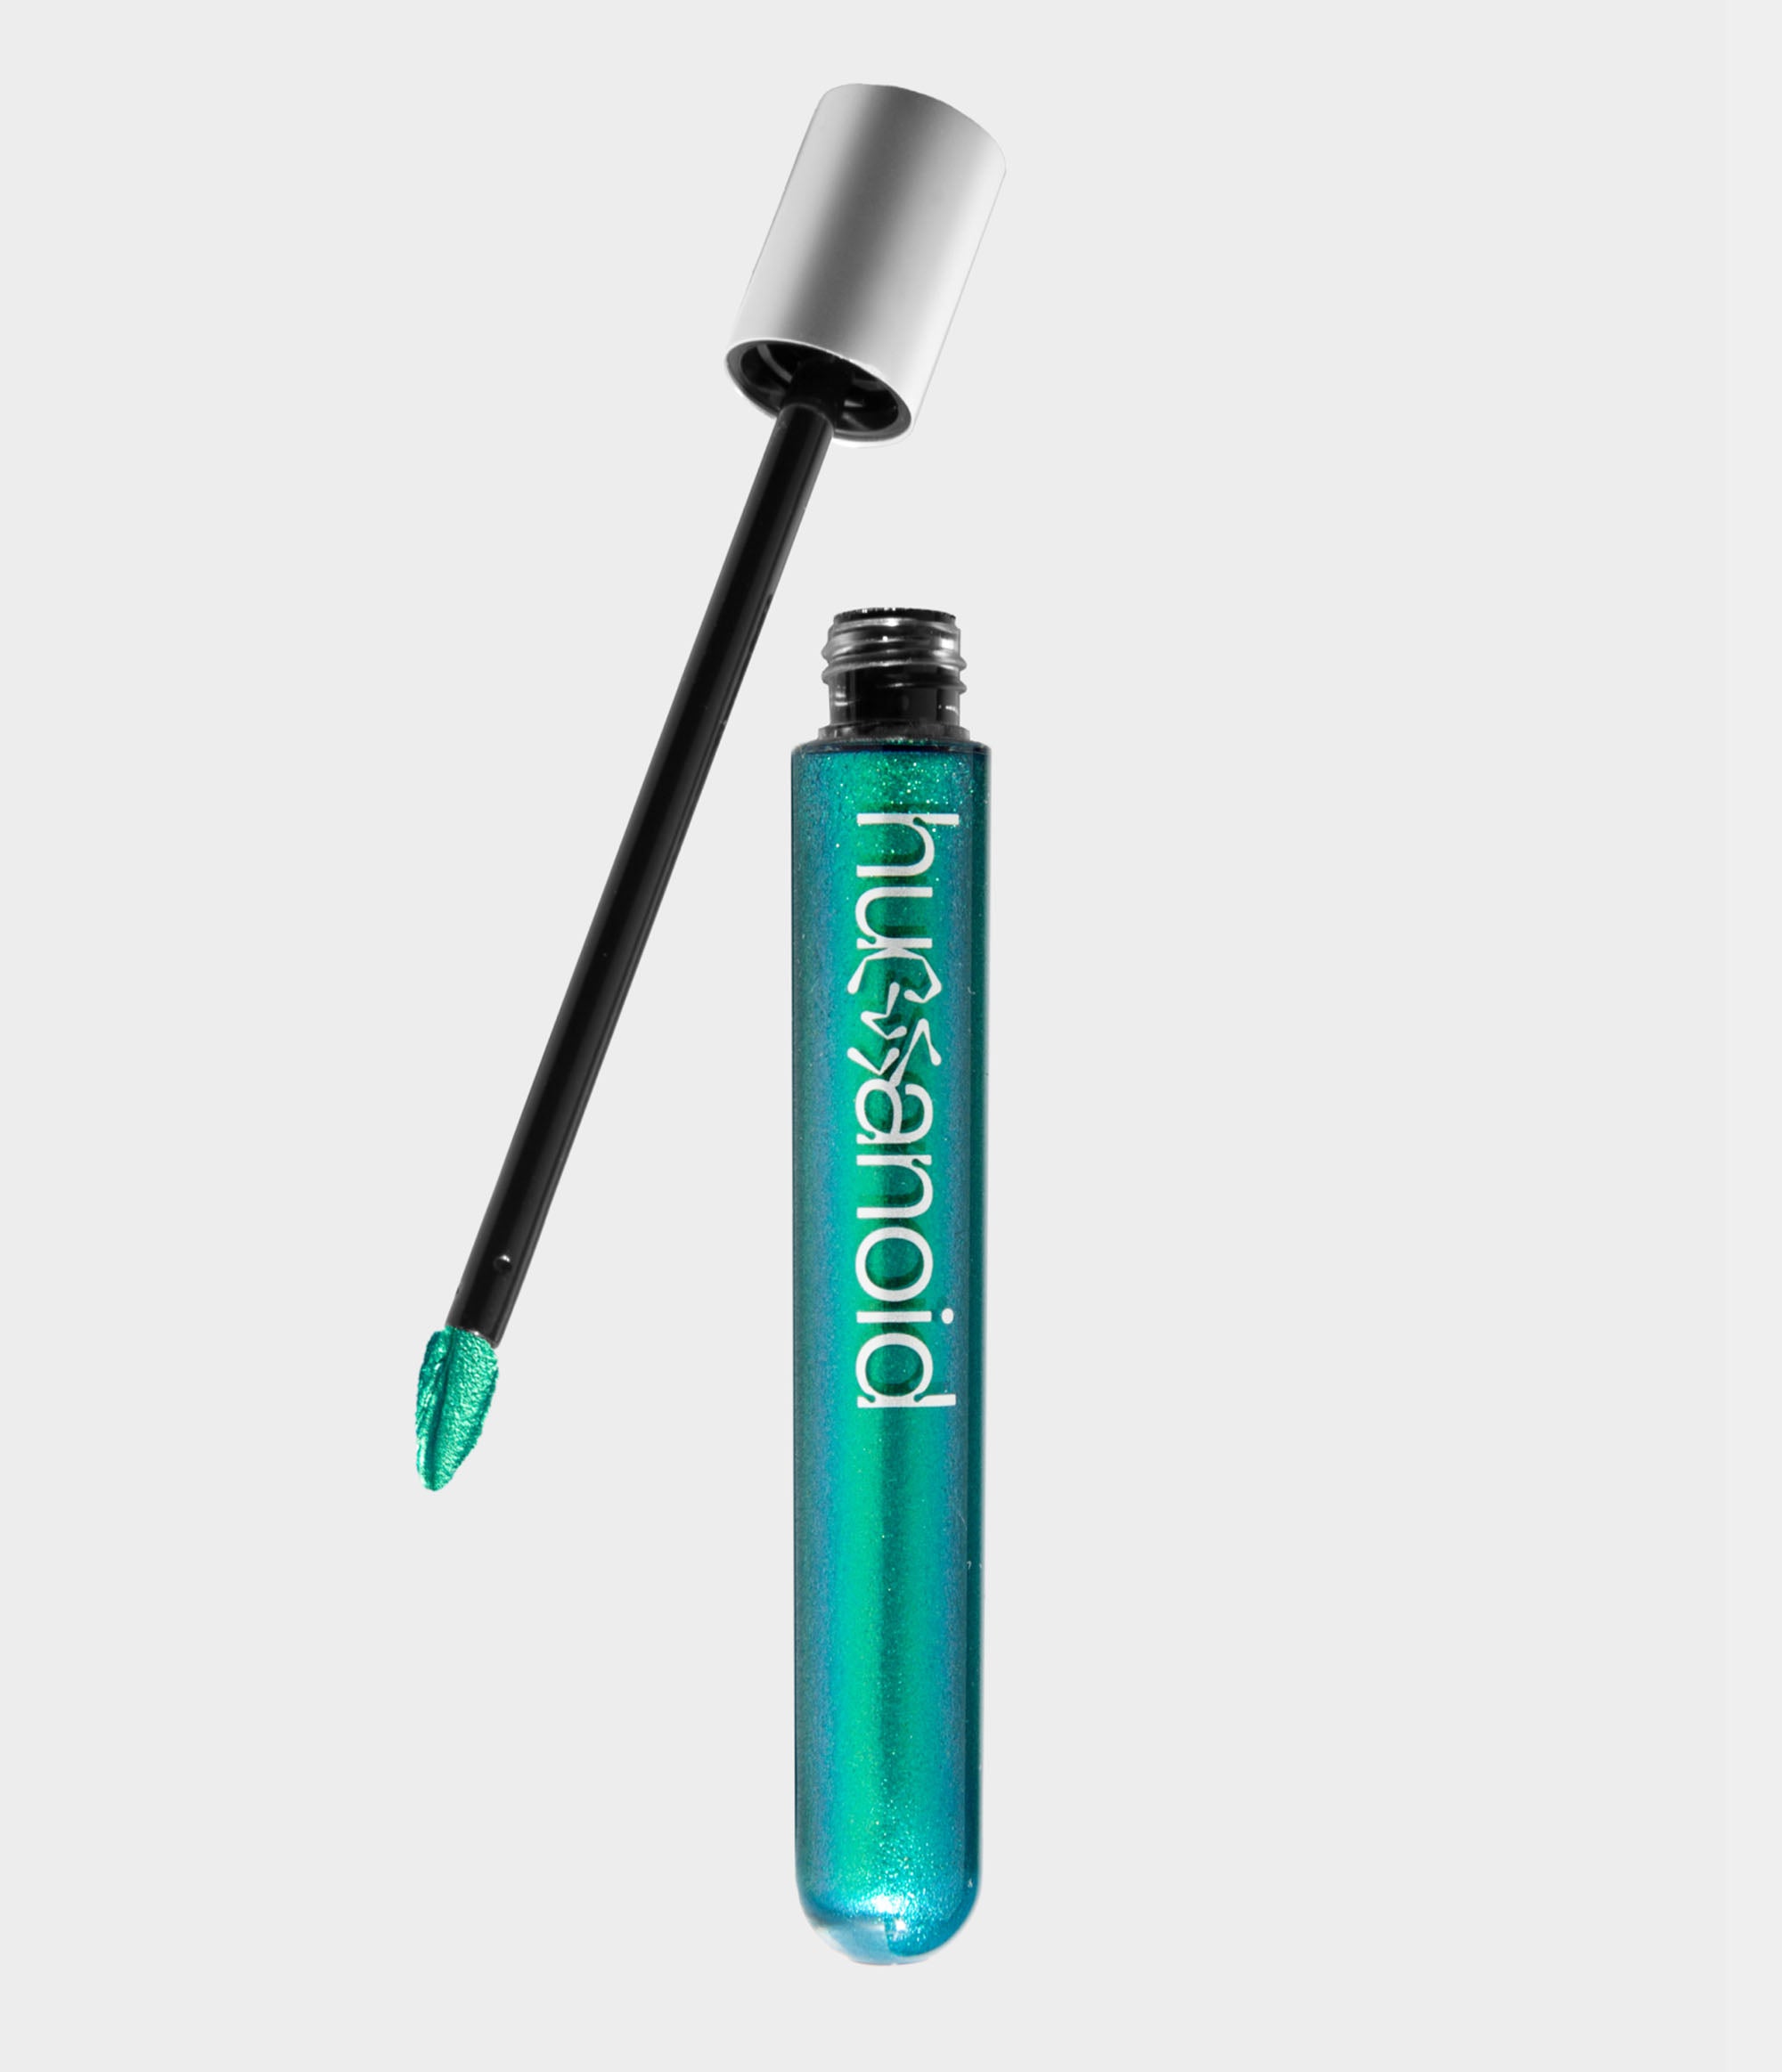 A transparent tube of shimmery green liquid makeup with an unscrewed silver cap sitting next to it. A doe foot makeup applicator coated in green makeup extends out of the cap.